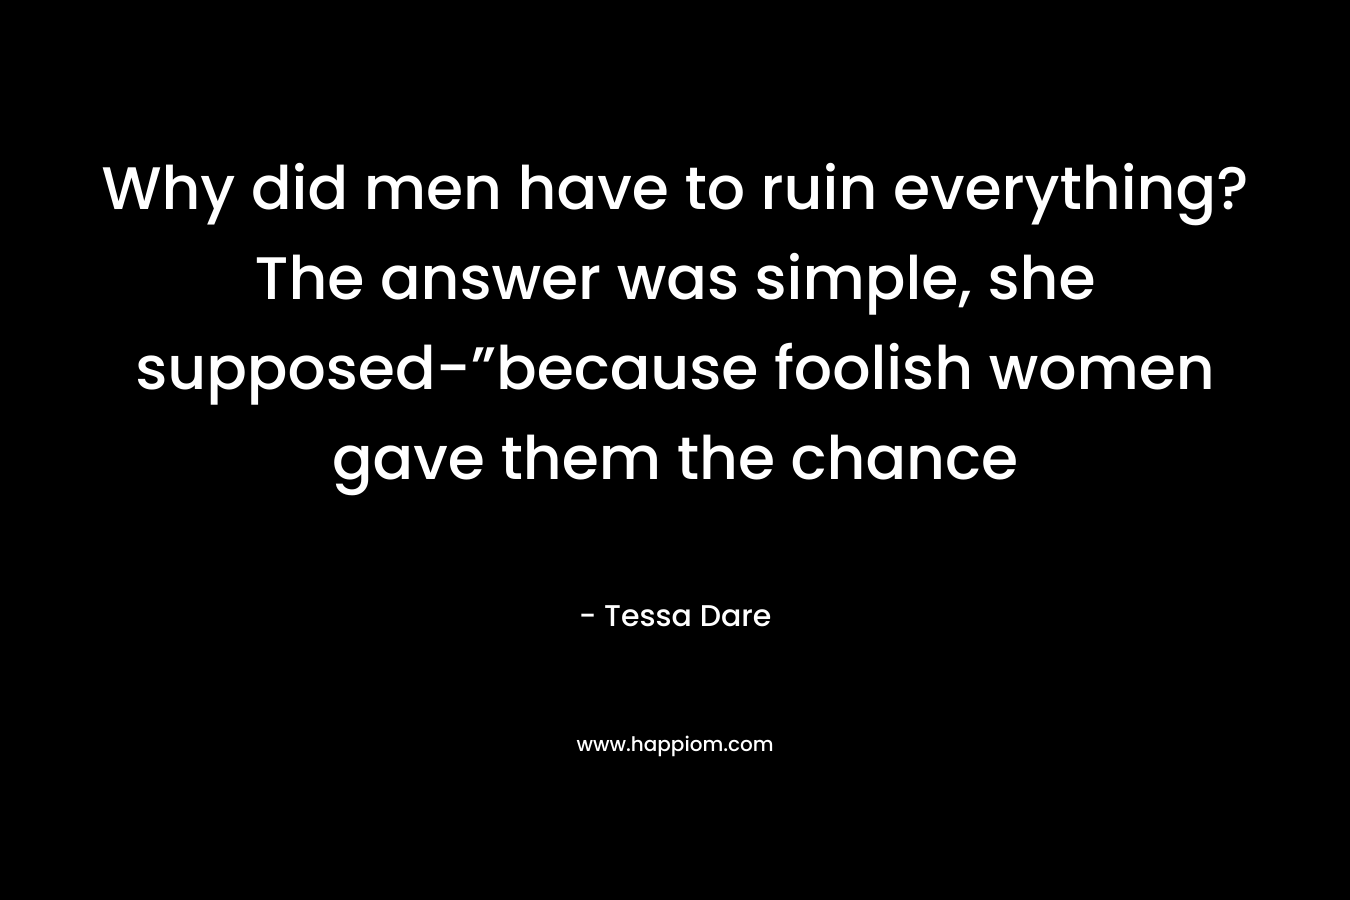 Why did men have to ruin everything? The answer was simple, she supposed-”because foolish women gave them the chance